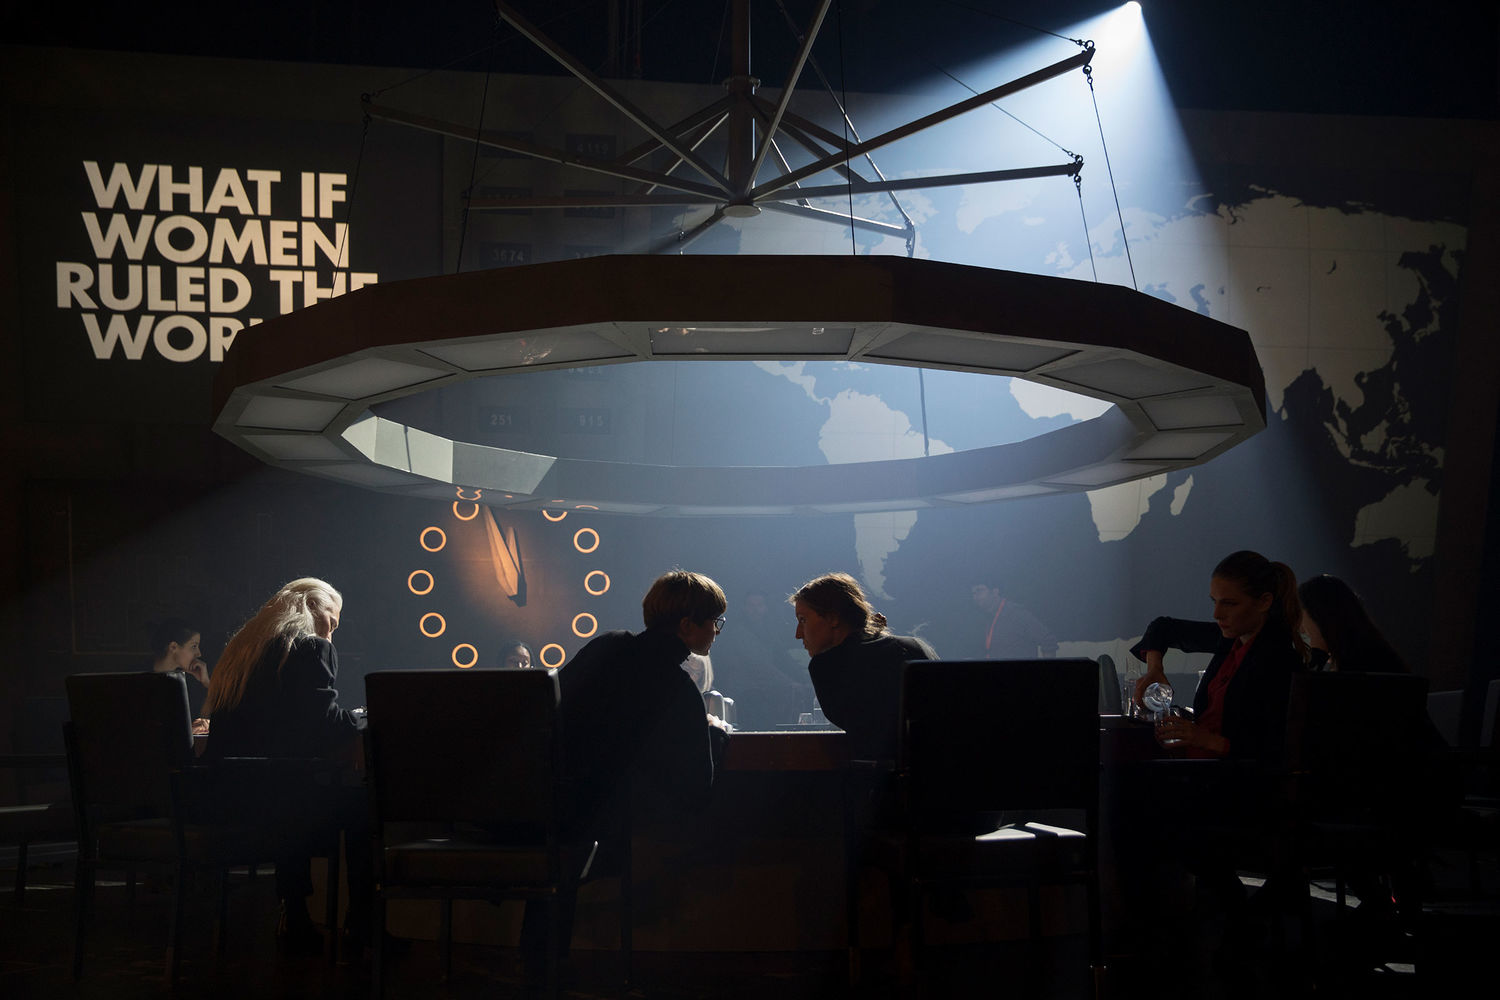 A photograph of a darkened room, with only natural, diffused light coming from the ceiling illuminating a table around which six women sit and talk and work. One pours water. They are dressed formally. A large map of the world is on the wall in front of them, along with the question, presented in bold white text, "What if Women Ruled the World?"